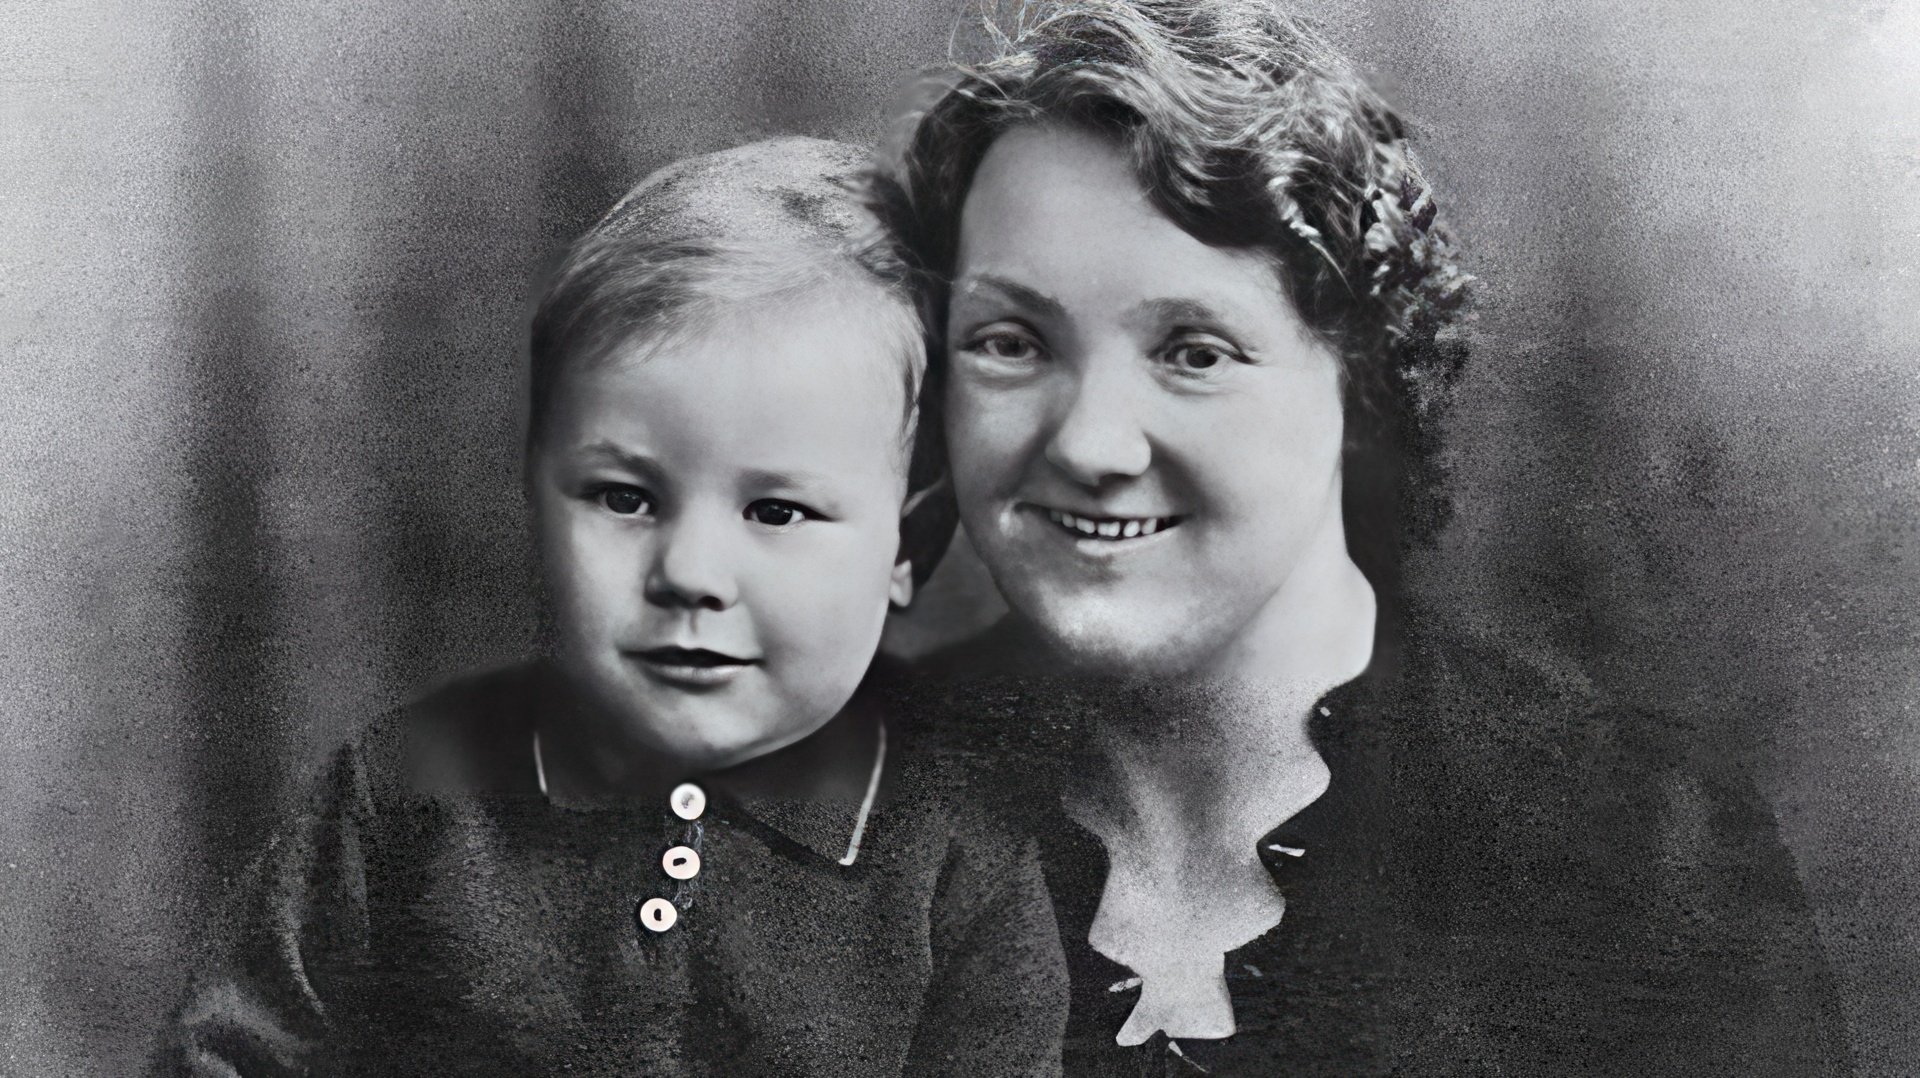 Patrick Stewart with his mother in childhood